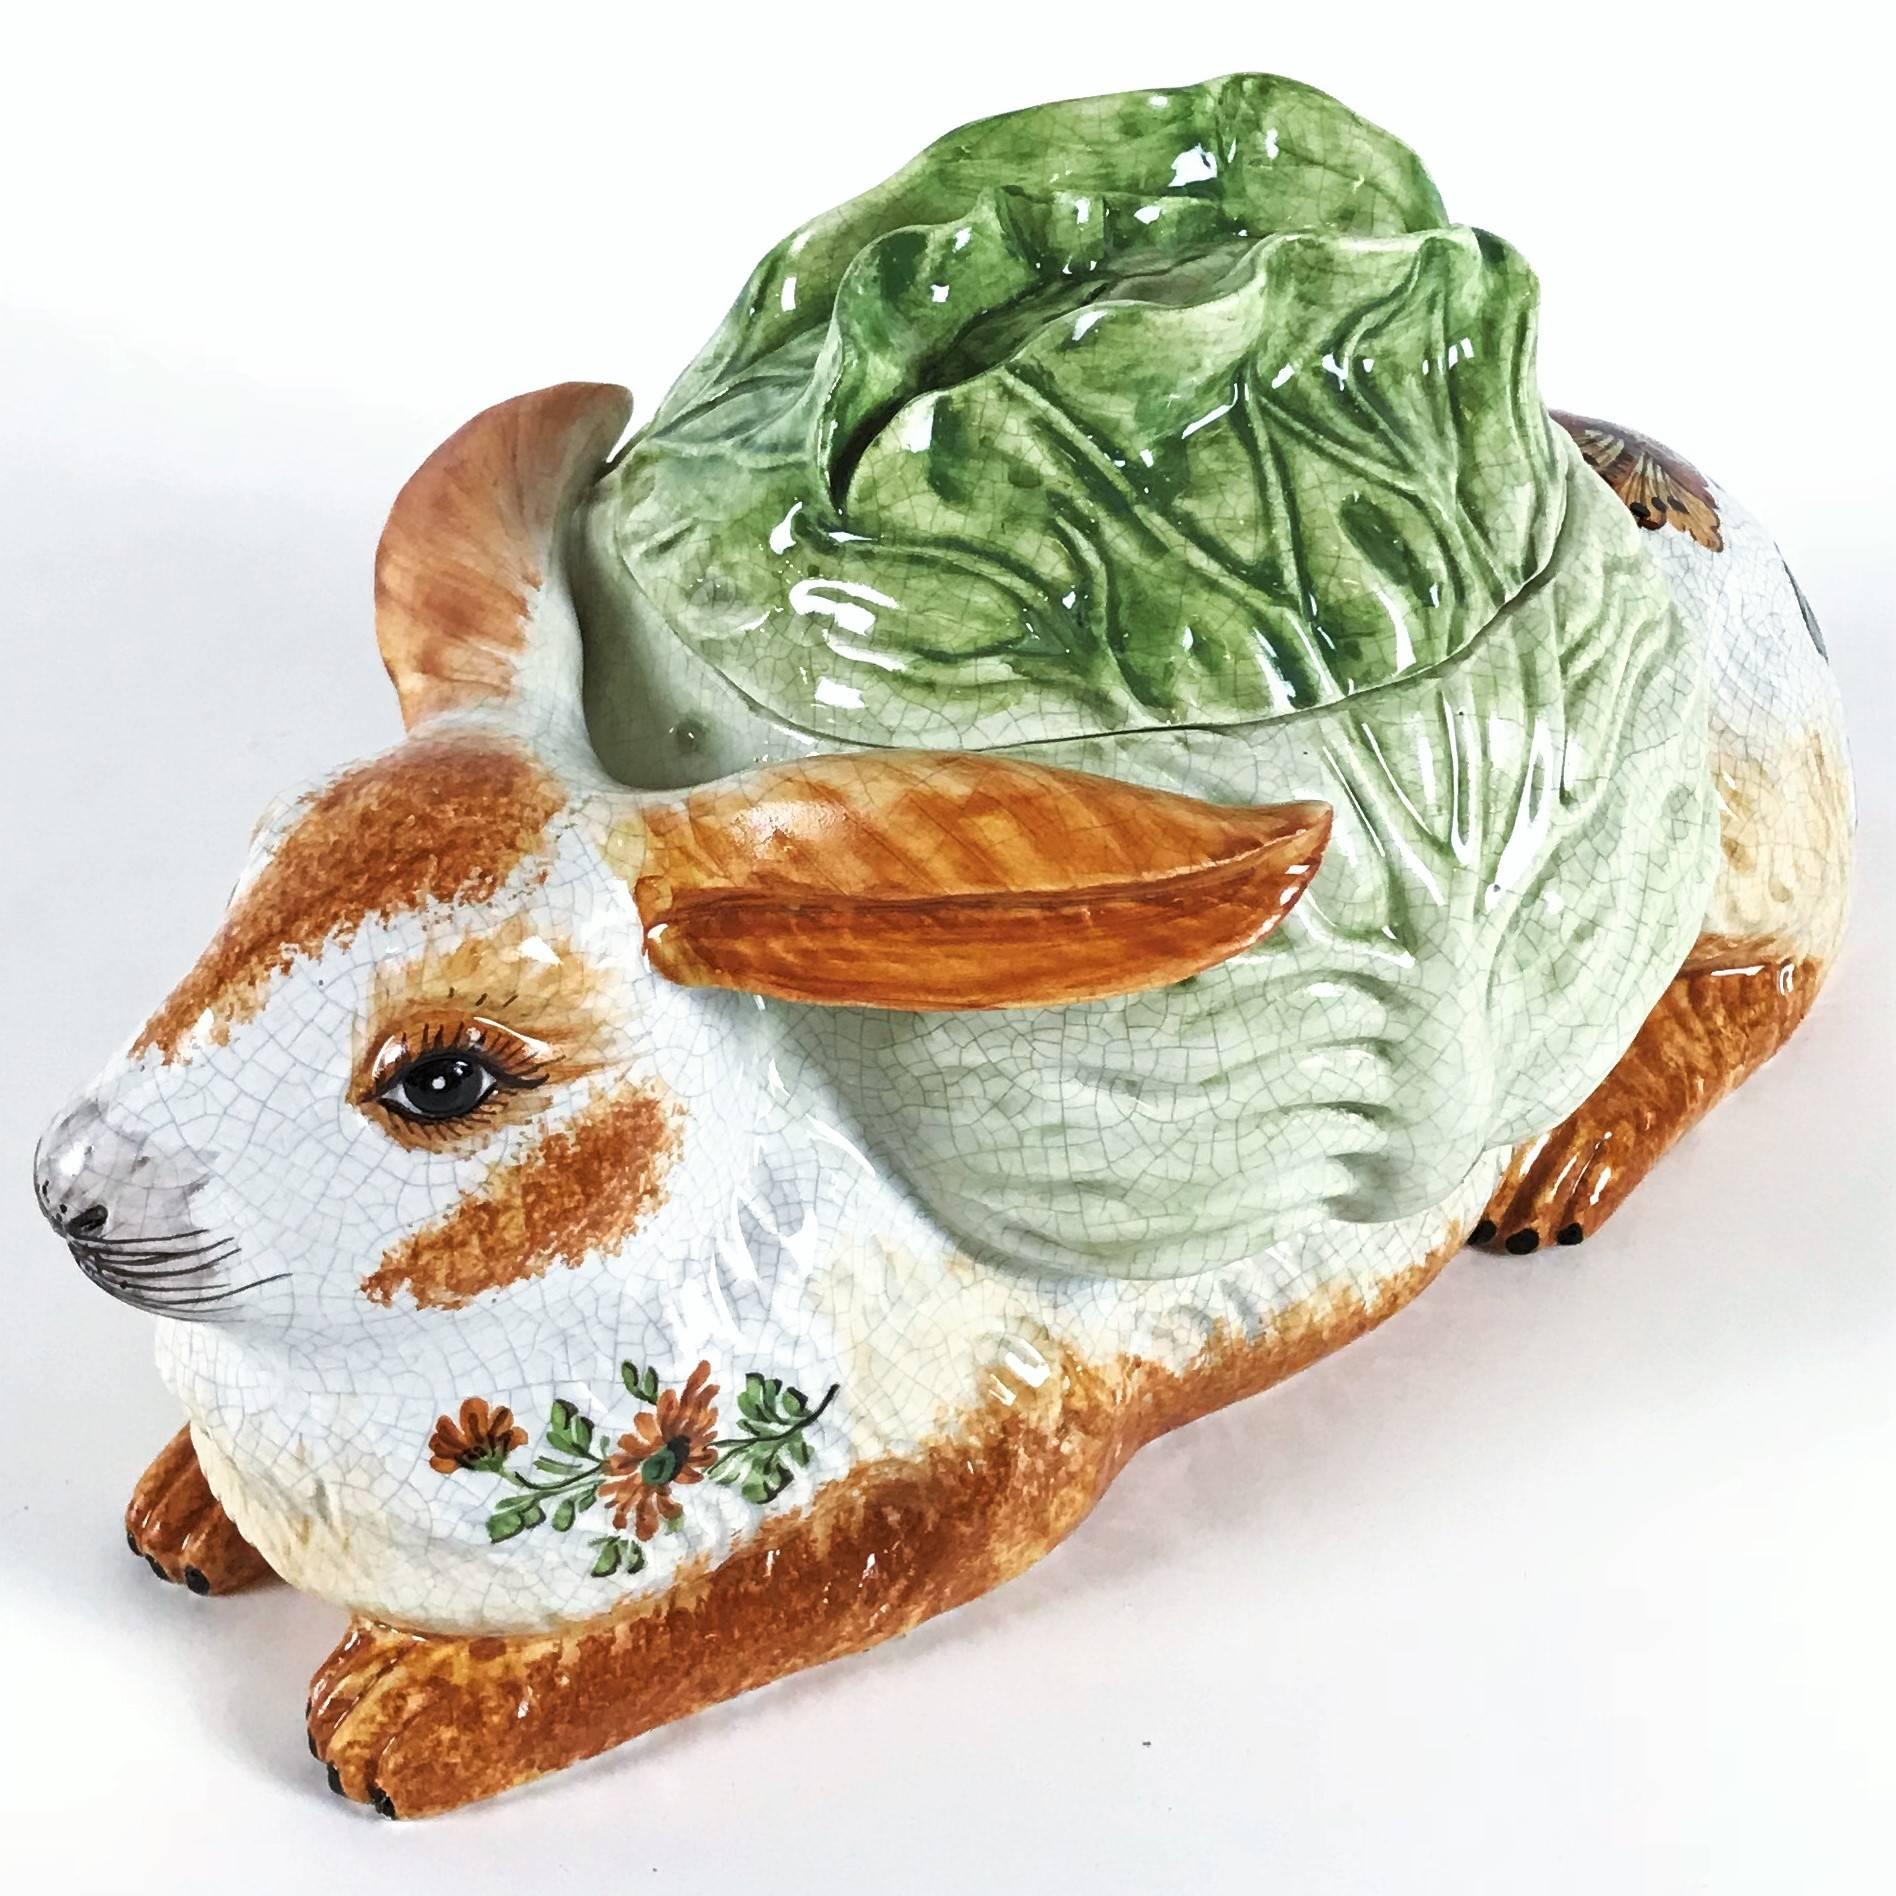 Unusual unique Italian handmade majolica rabbit with cabbage soup tureen and spoon. Lovely hand-painted flowers and details with very fine crackle glaze. Wonderful display piece.

Measures: 
Length 35 cm / 14 in. 
Height 19 cm / 7.5 in
Depth 23 cm /